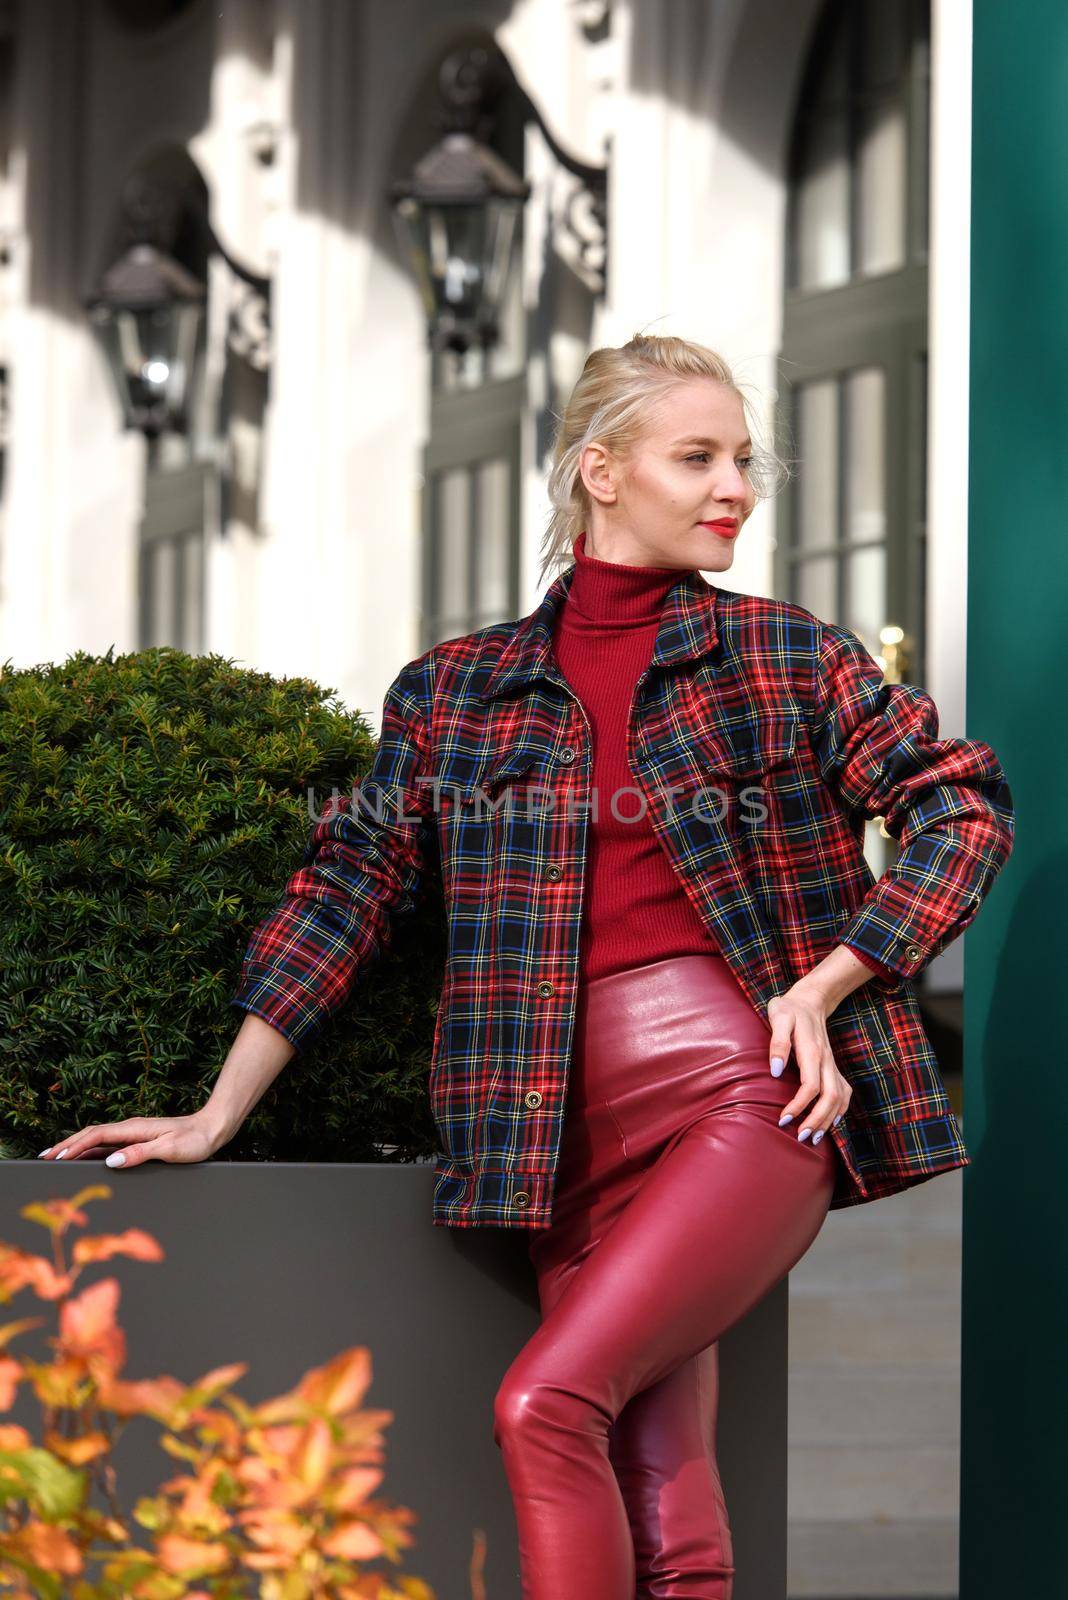 fashionable blonde girl with a red lipstick posing outdoors . Dressed in a red leather leggings, turtleneck and checkered jacket. fit figure by Ashtray25